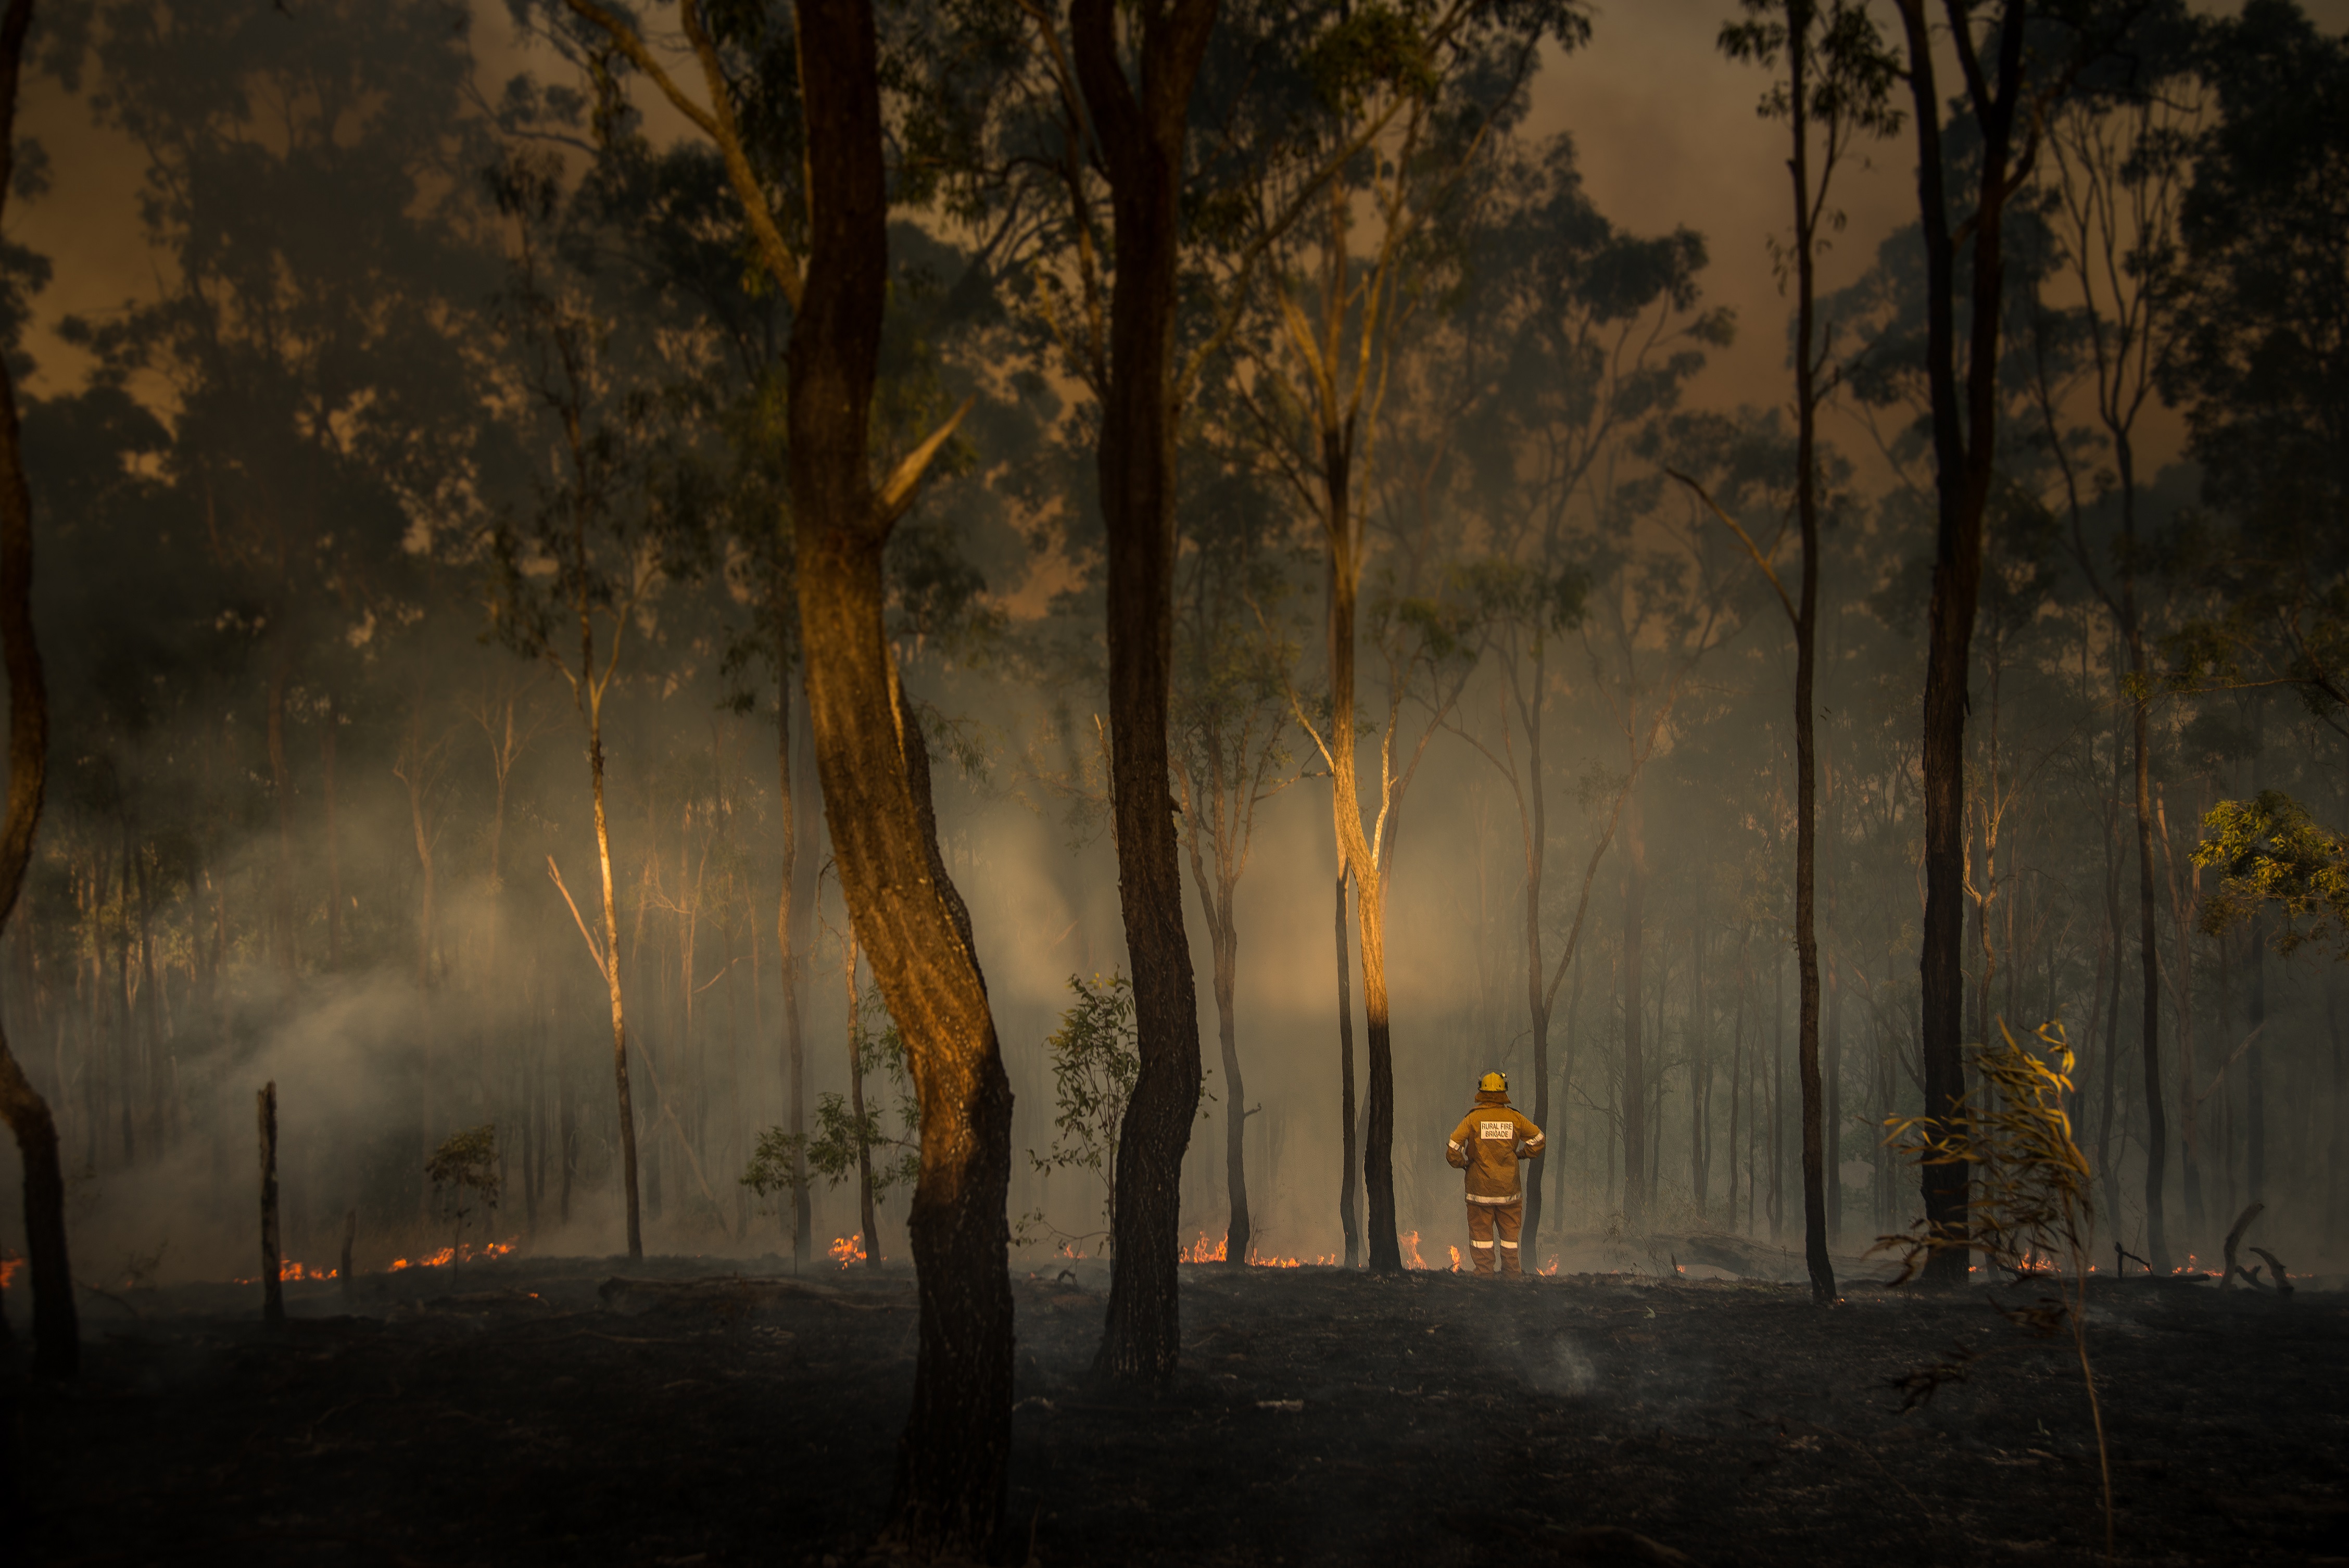 Scene from a Queensland Bushfire, September 2019. Getty Images